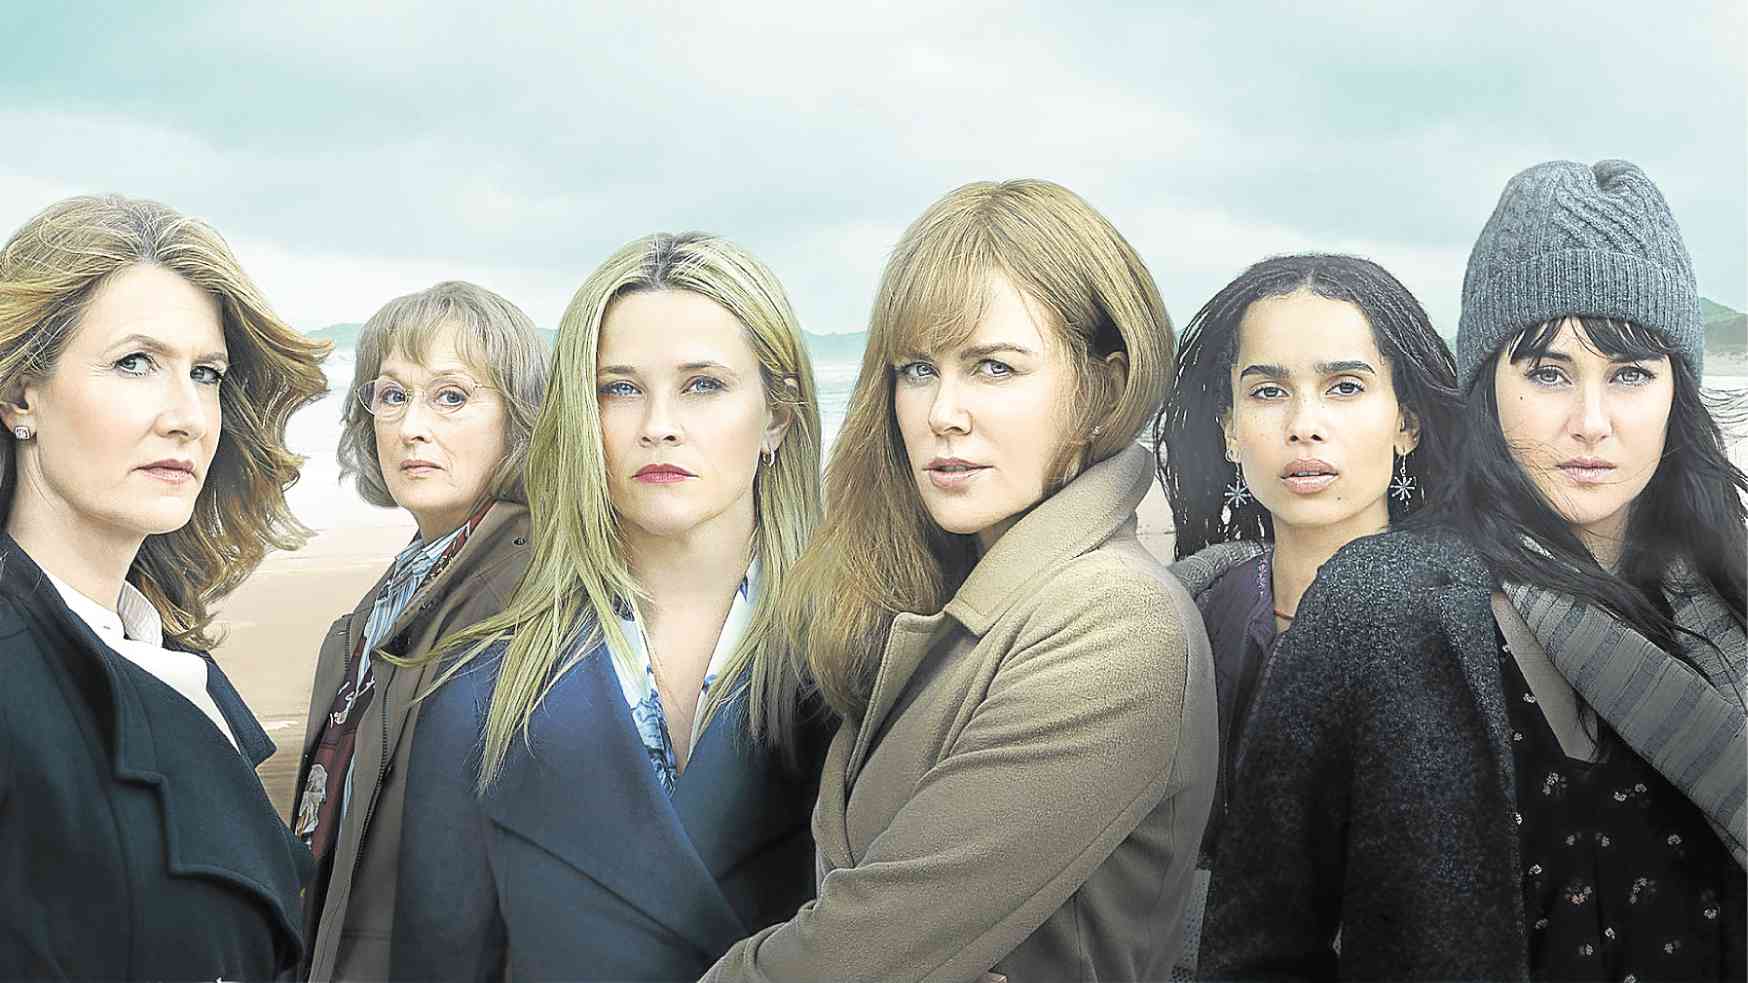 ‘Big Little Lies’ second Season is All About Fallout (and Meryl)